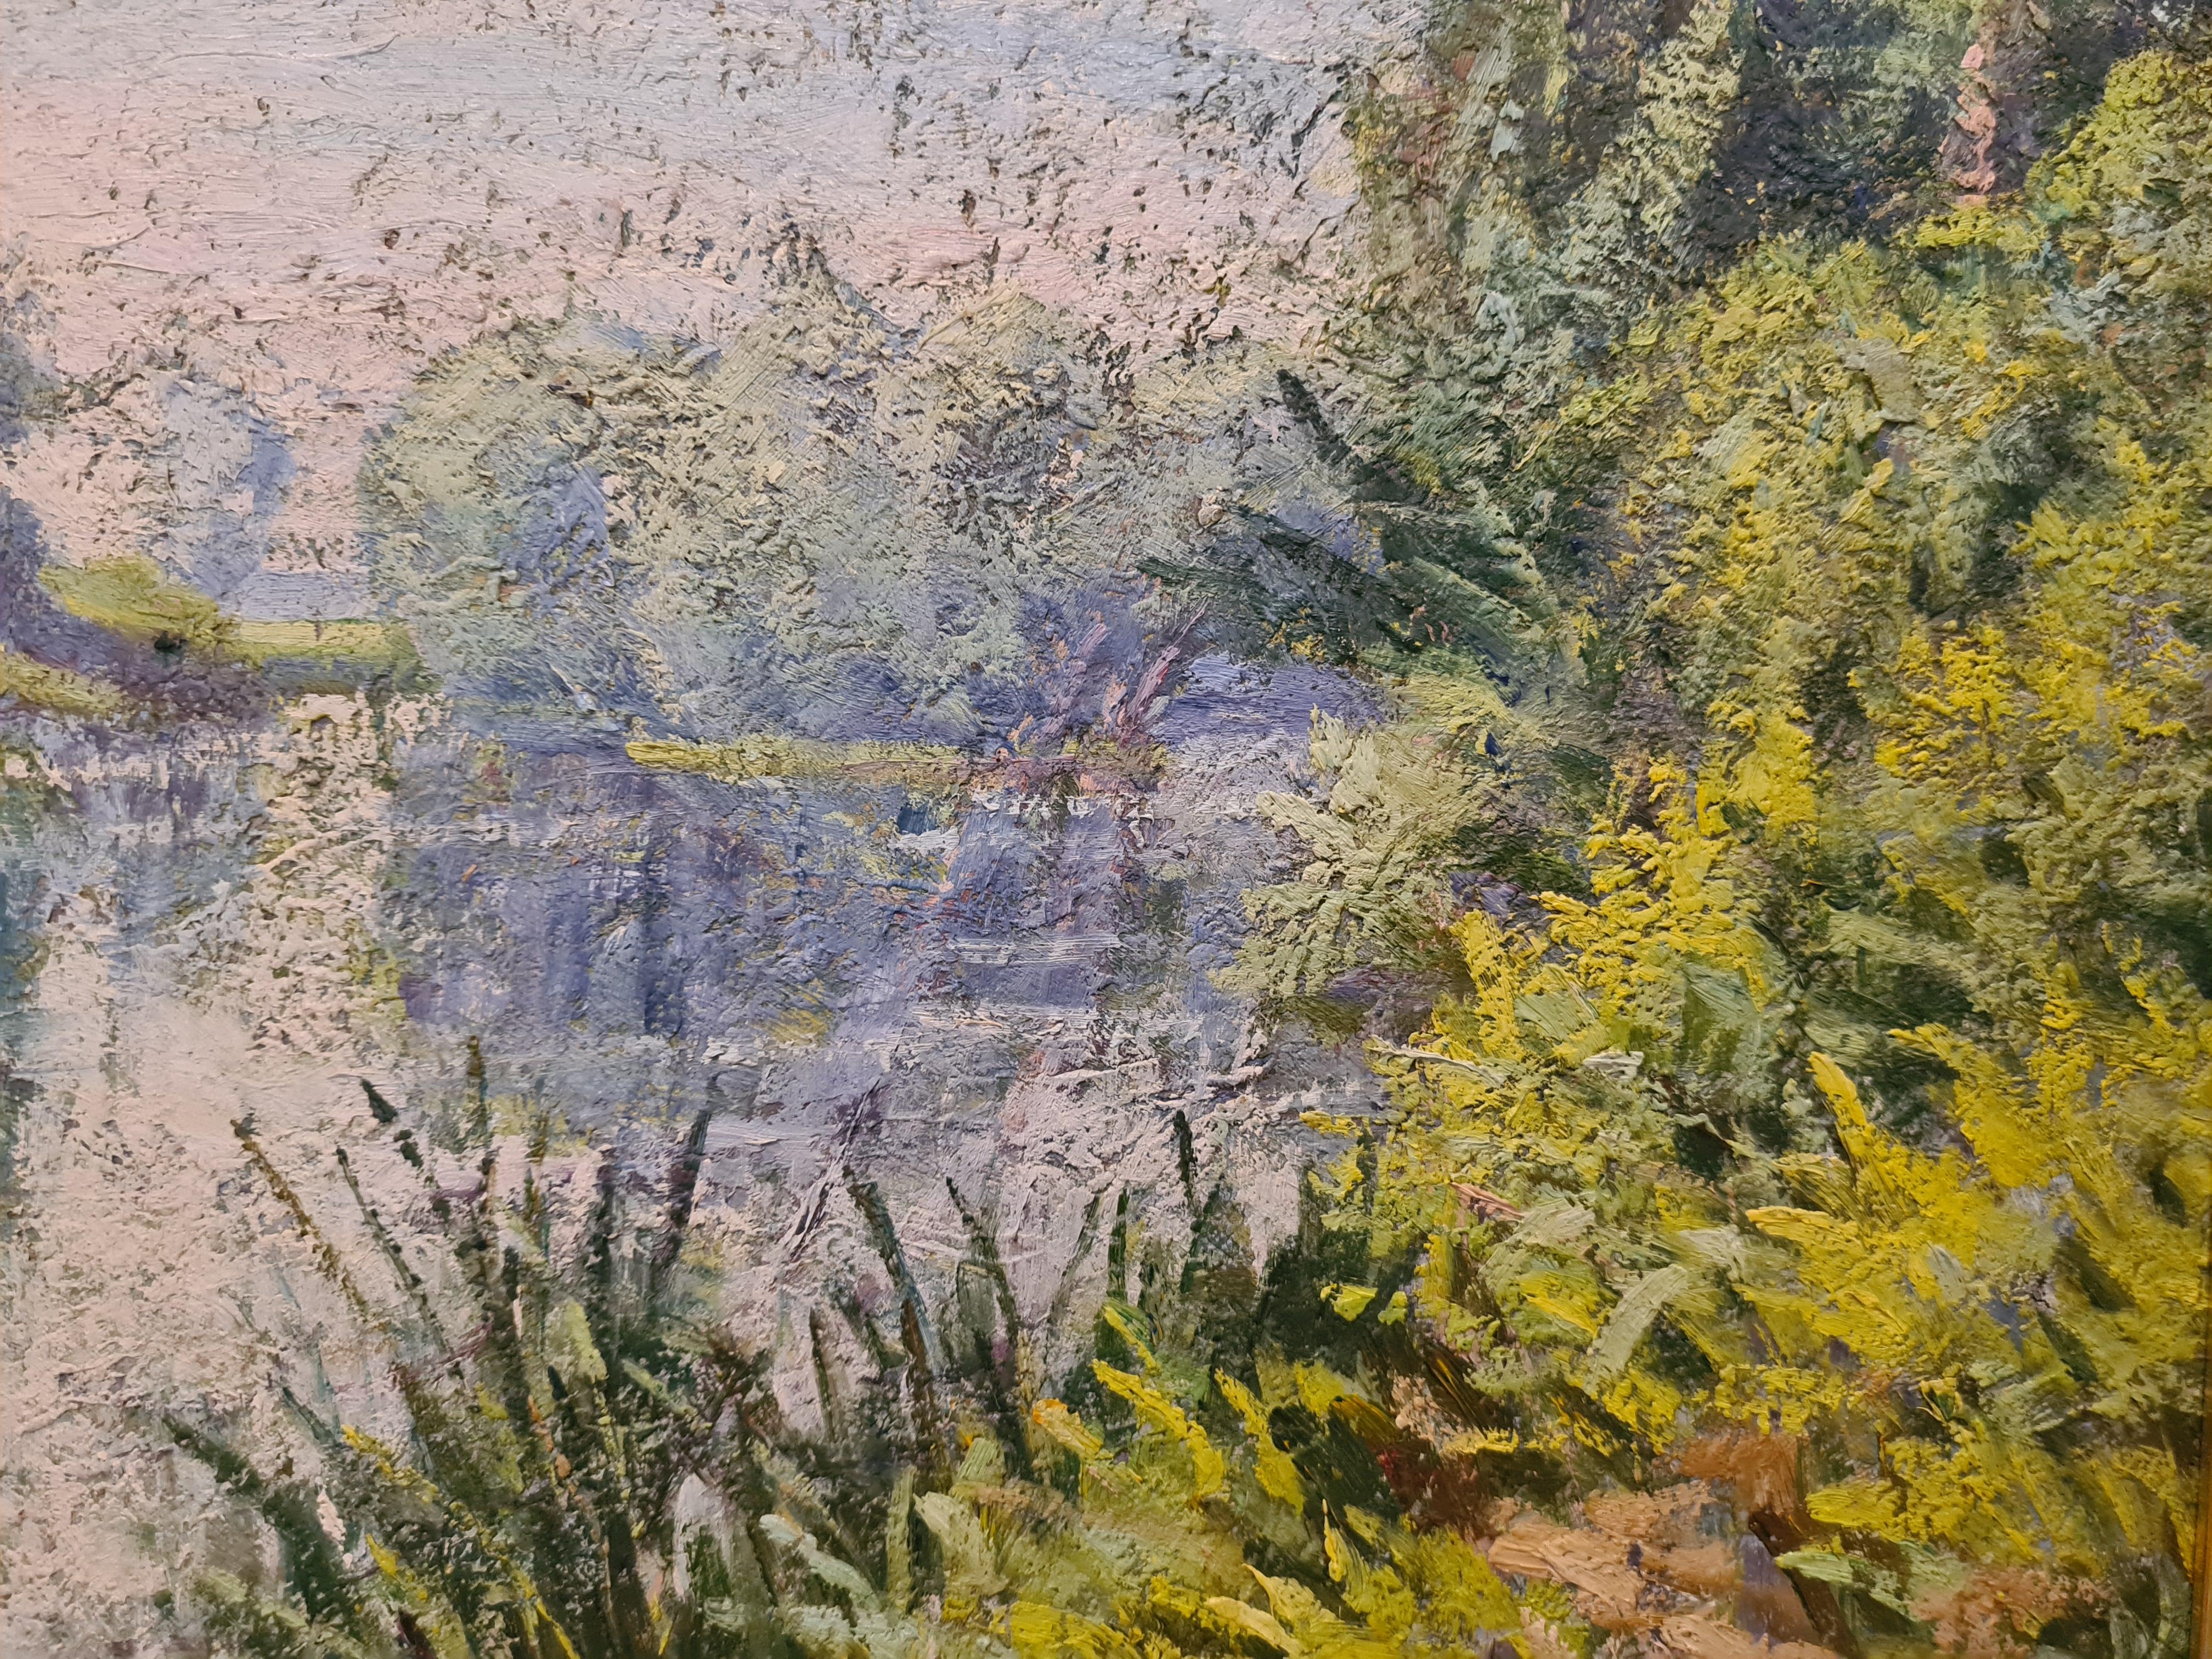 Early 20th Century French, Post Impressionist, view of a river and its bank, almost Pointillist in style, oil on board. The work is not signed but is on good quality 'atelier board' and is reminiscent of the paintings at this period of Henri Martin